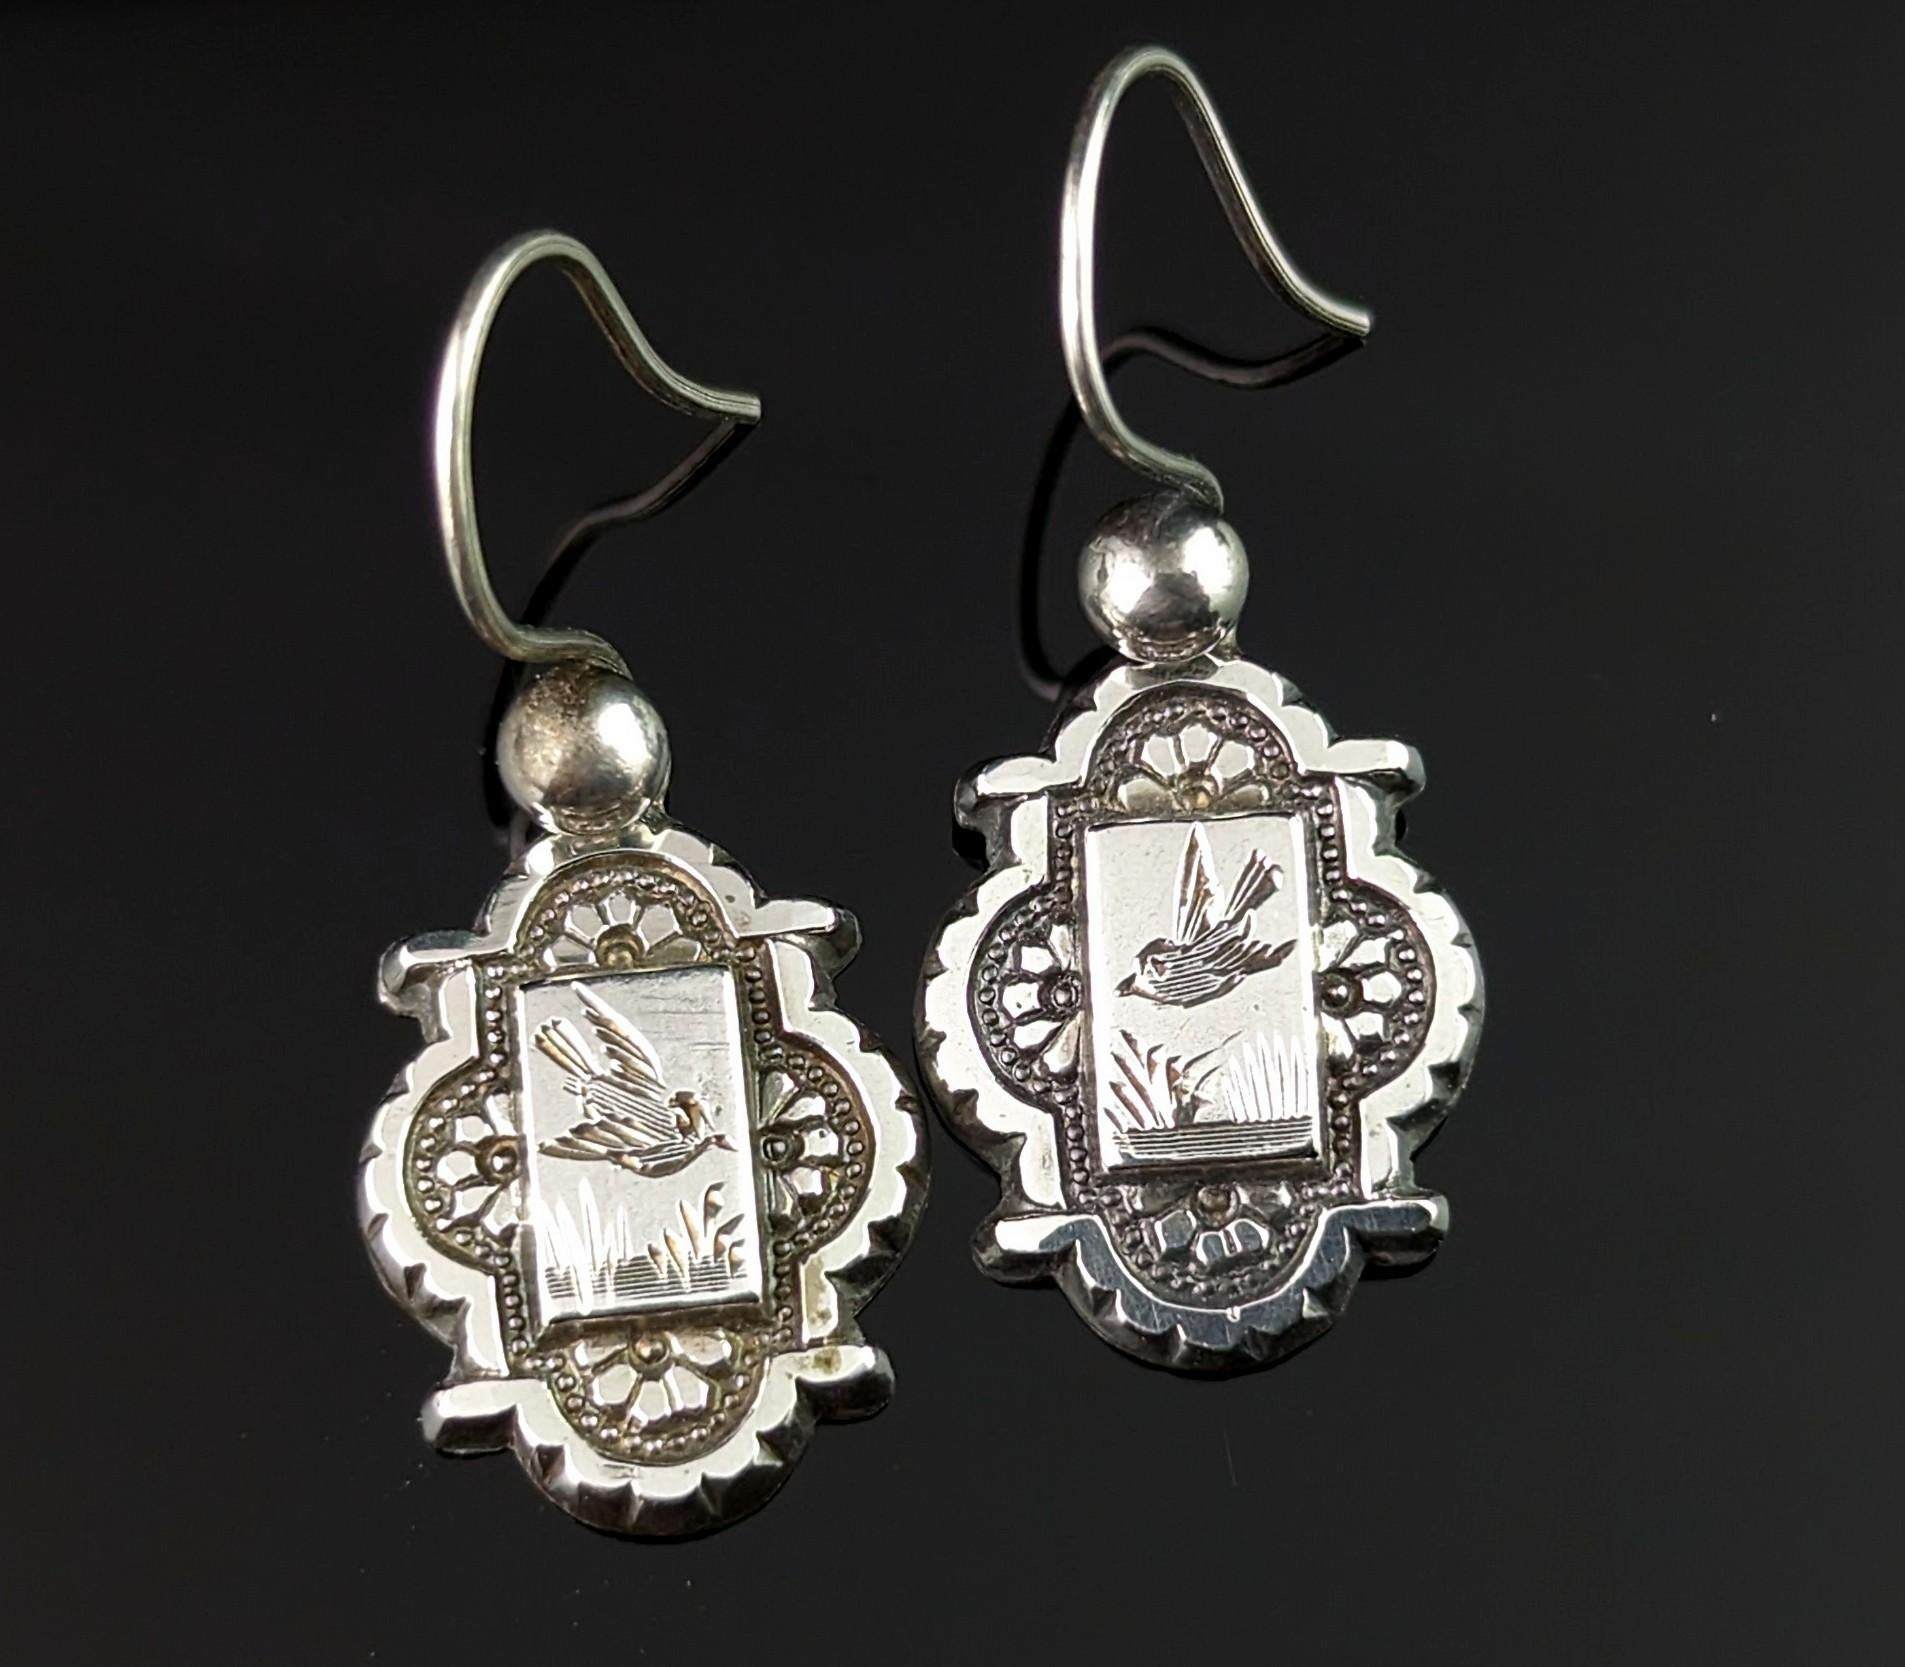 A sweet pair of Victorian sterling silver swallow earrings.

These ooze aesthetic style and are an oval shape with engraved central designs of swallows in flight with little repousse floral designs to the outer edges.

So much detail in this prerty